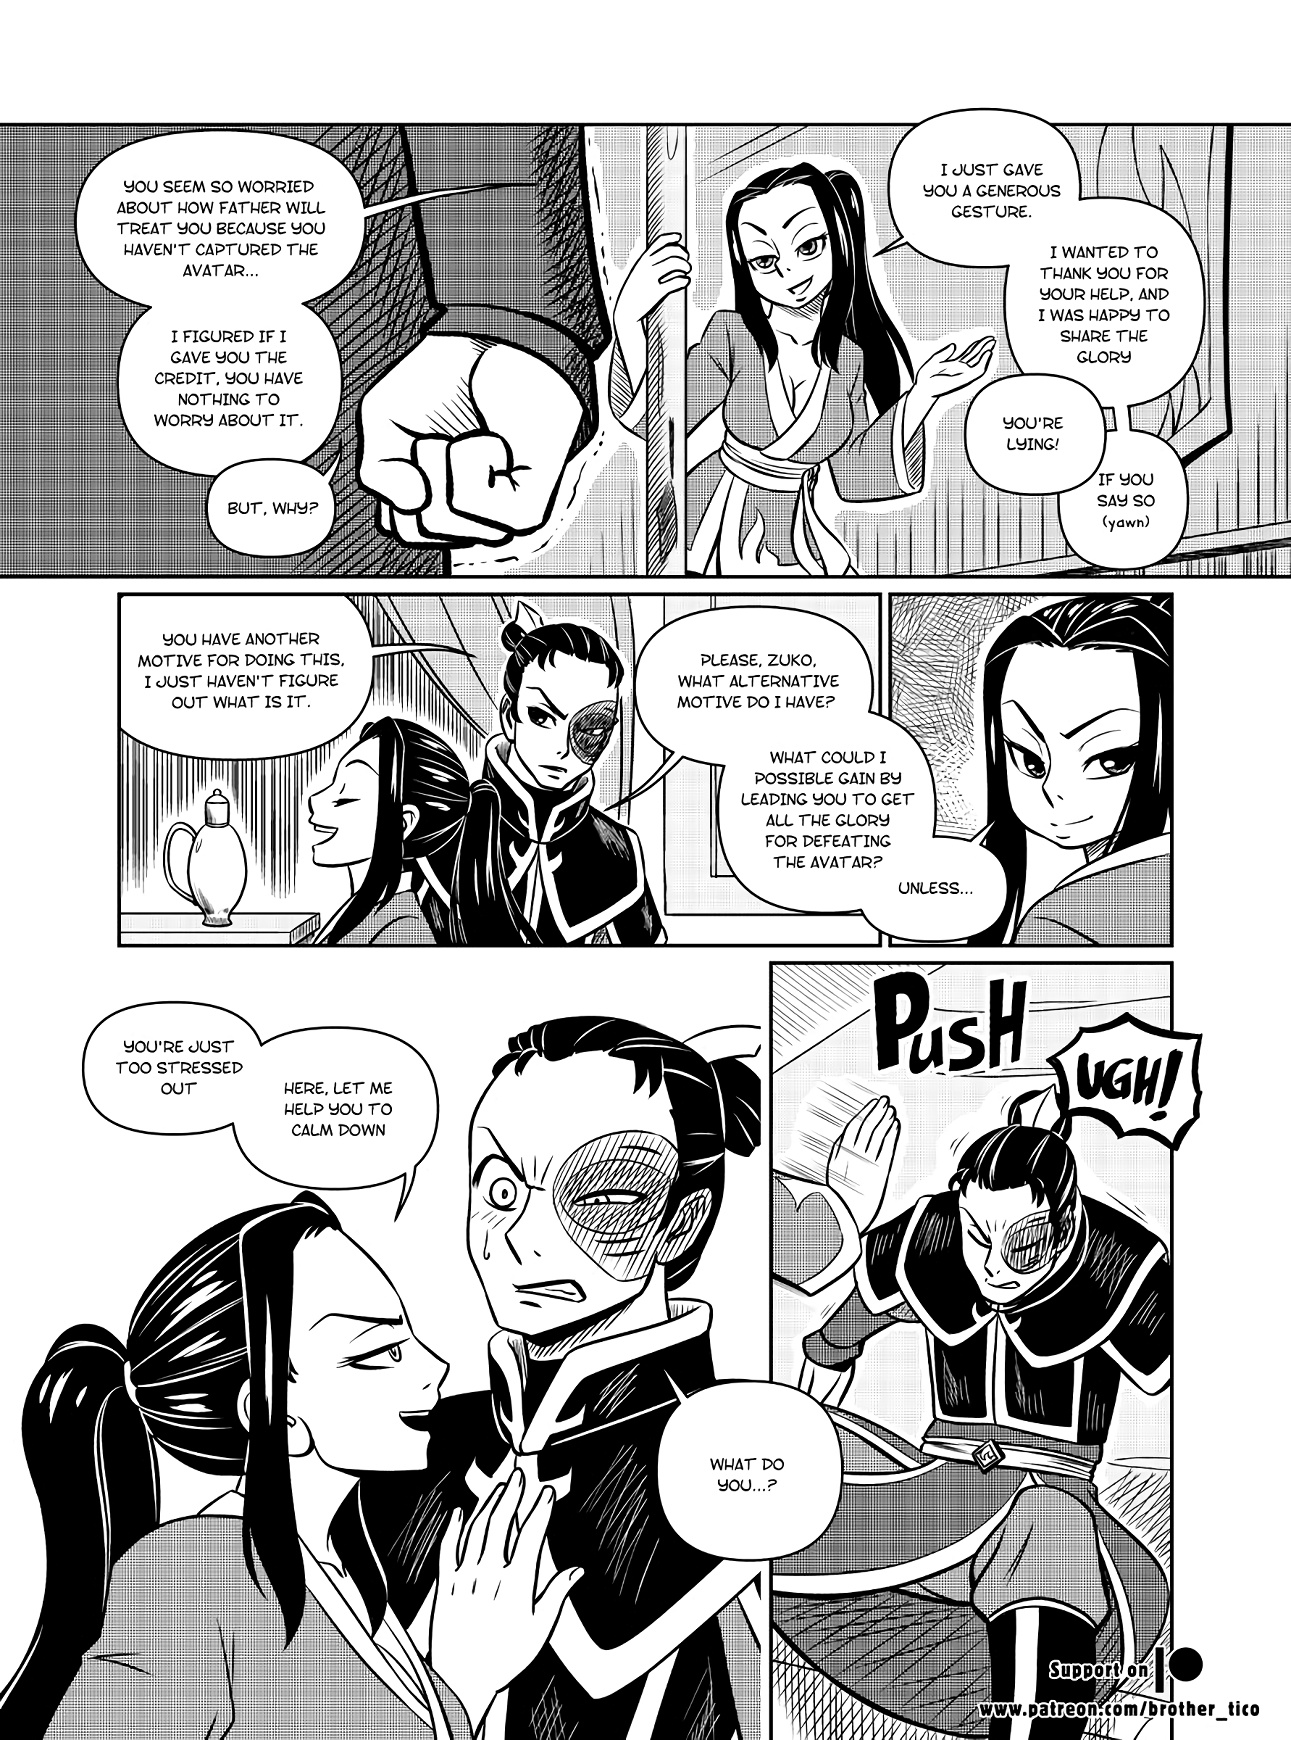 ATLA Between Siblings (avatar the last airbender) porn comic by [brother-tico].  Ponytail porn comics.